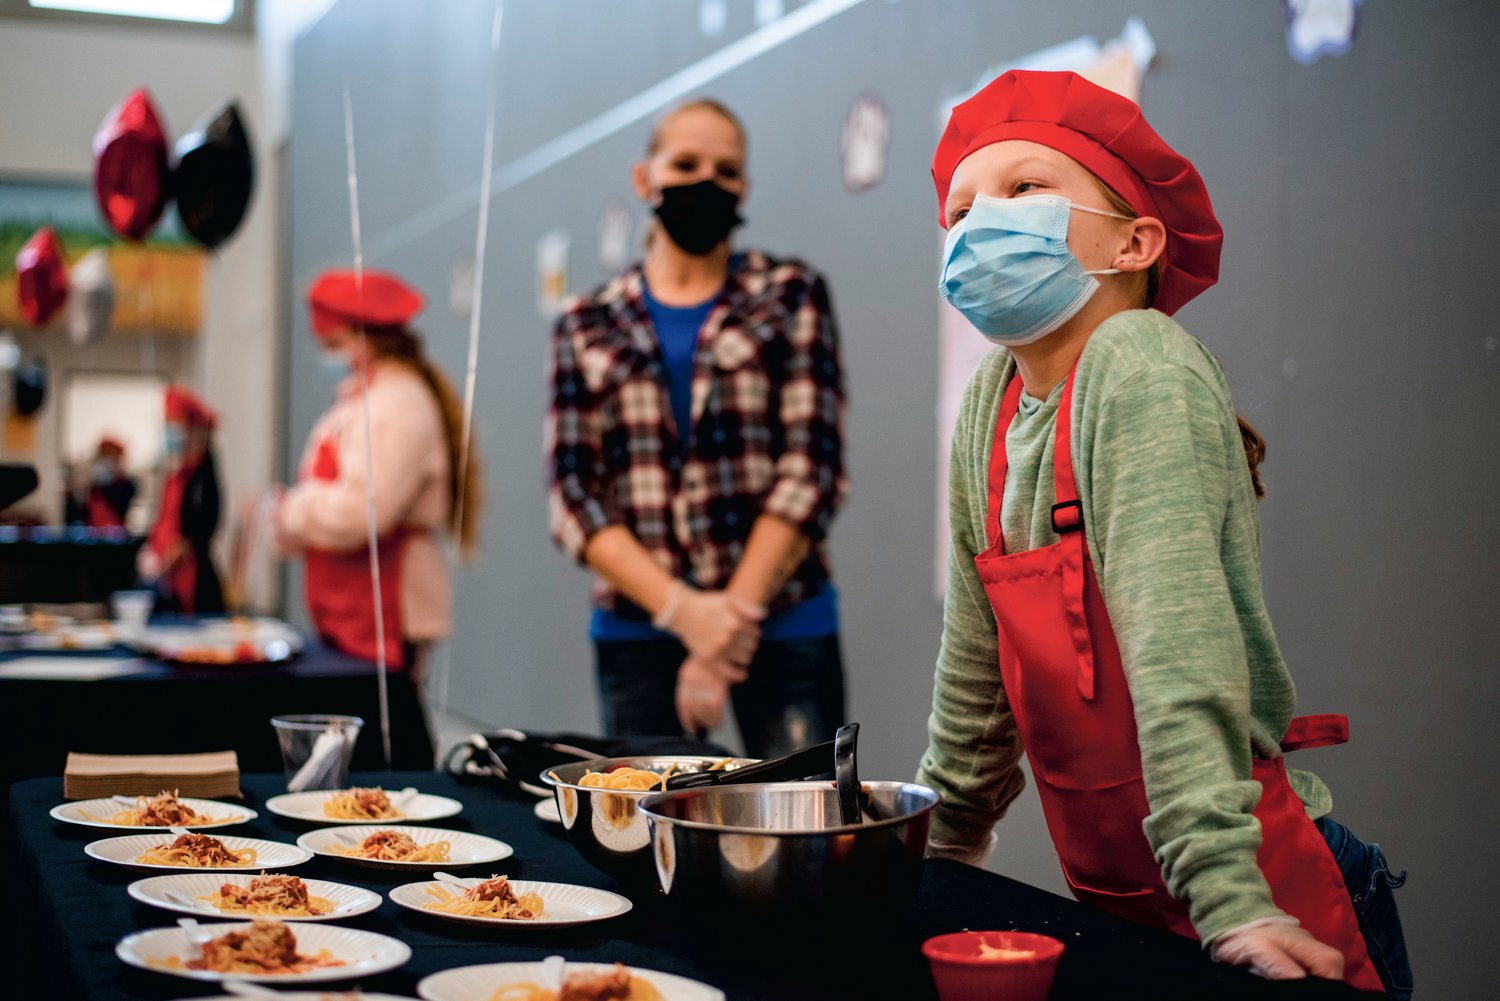 Ashtyn Gallagher, a fourth grader at Orin C. Smith Elementary, talks about her turkey meatballs during a Future Chef event Monday in Chehalis.